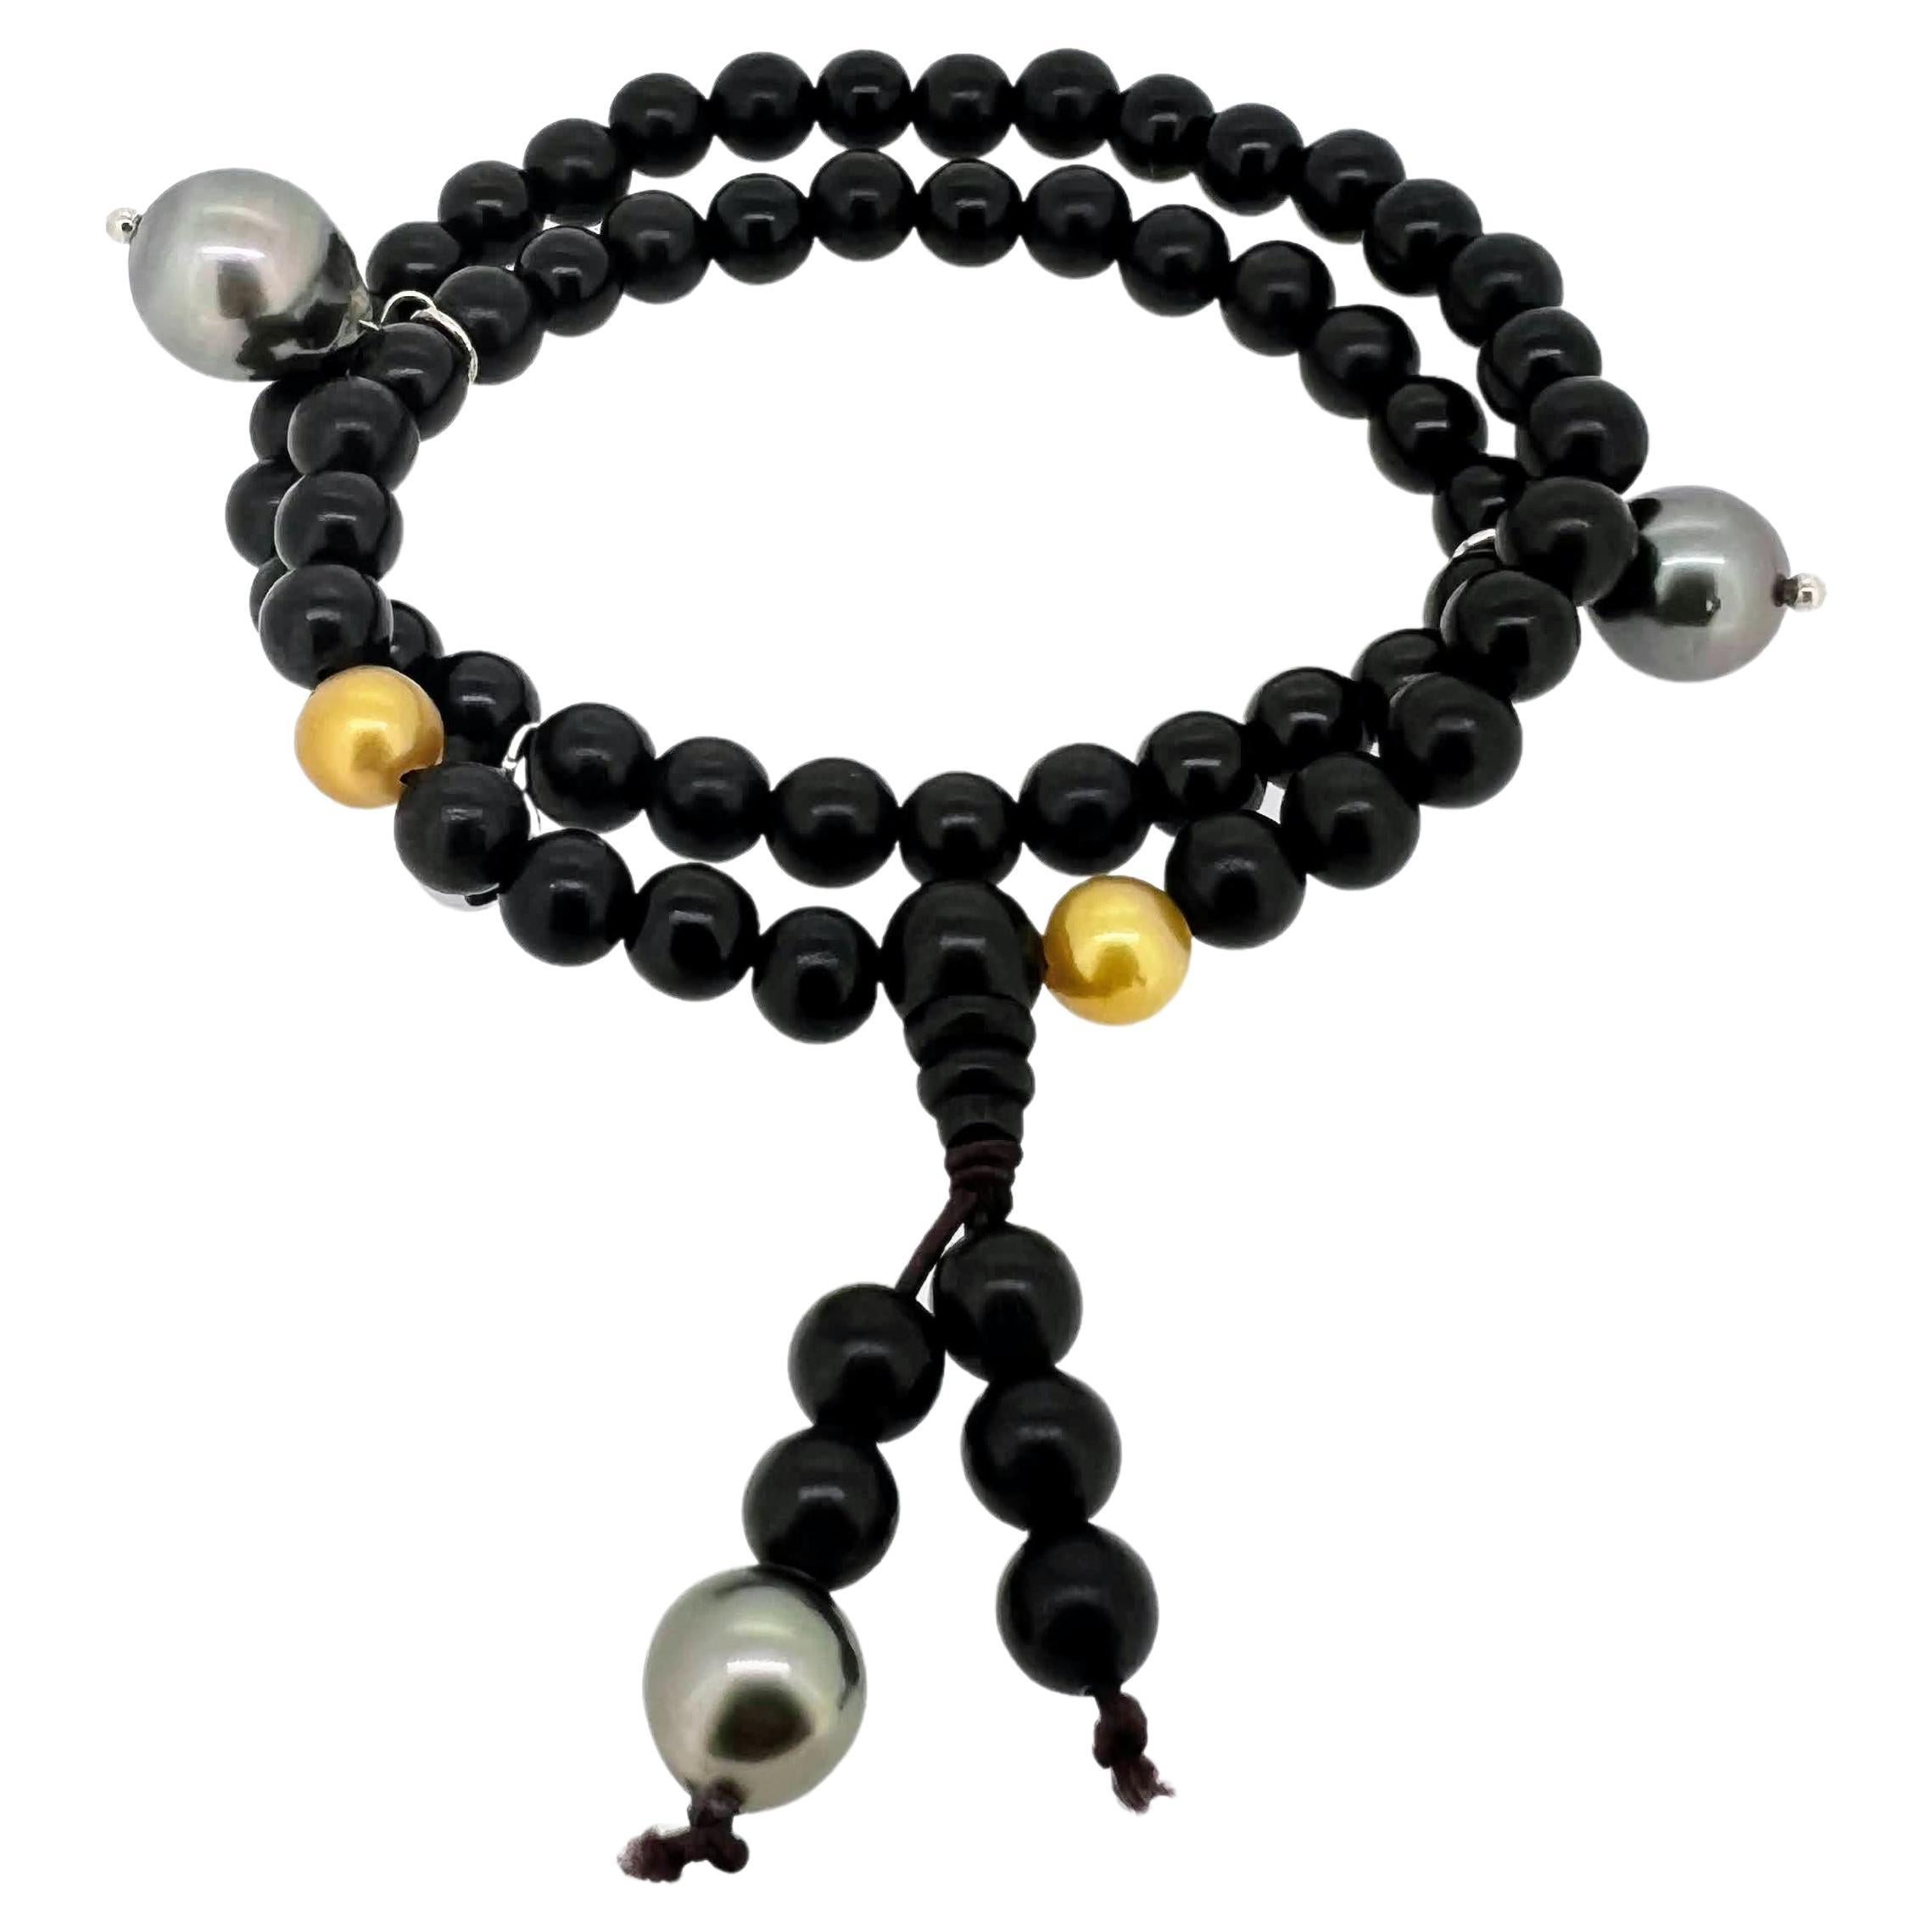 Prayer bracelet/necklace with ebony beads, Golden South Sea and Tahiti pearls